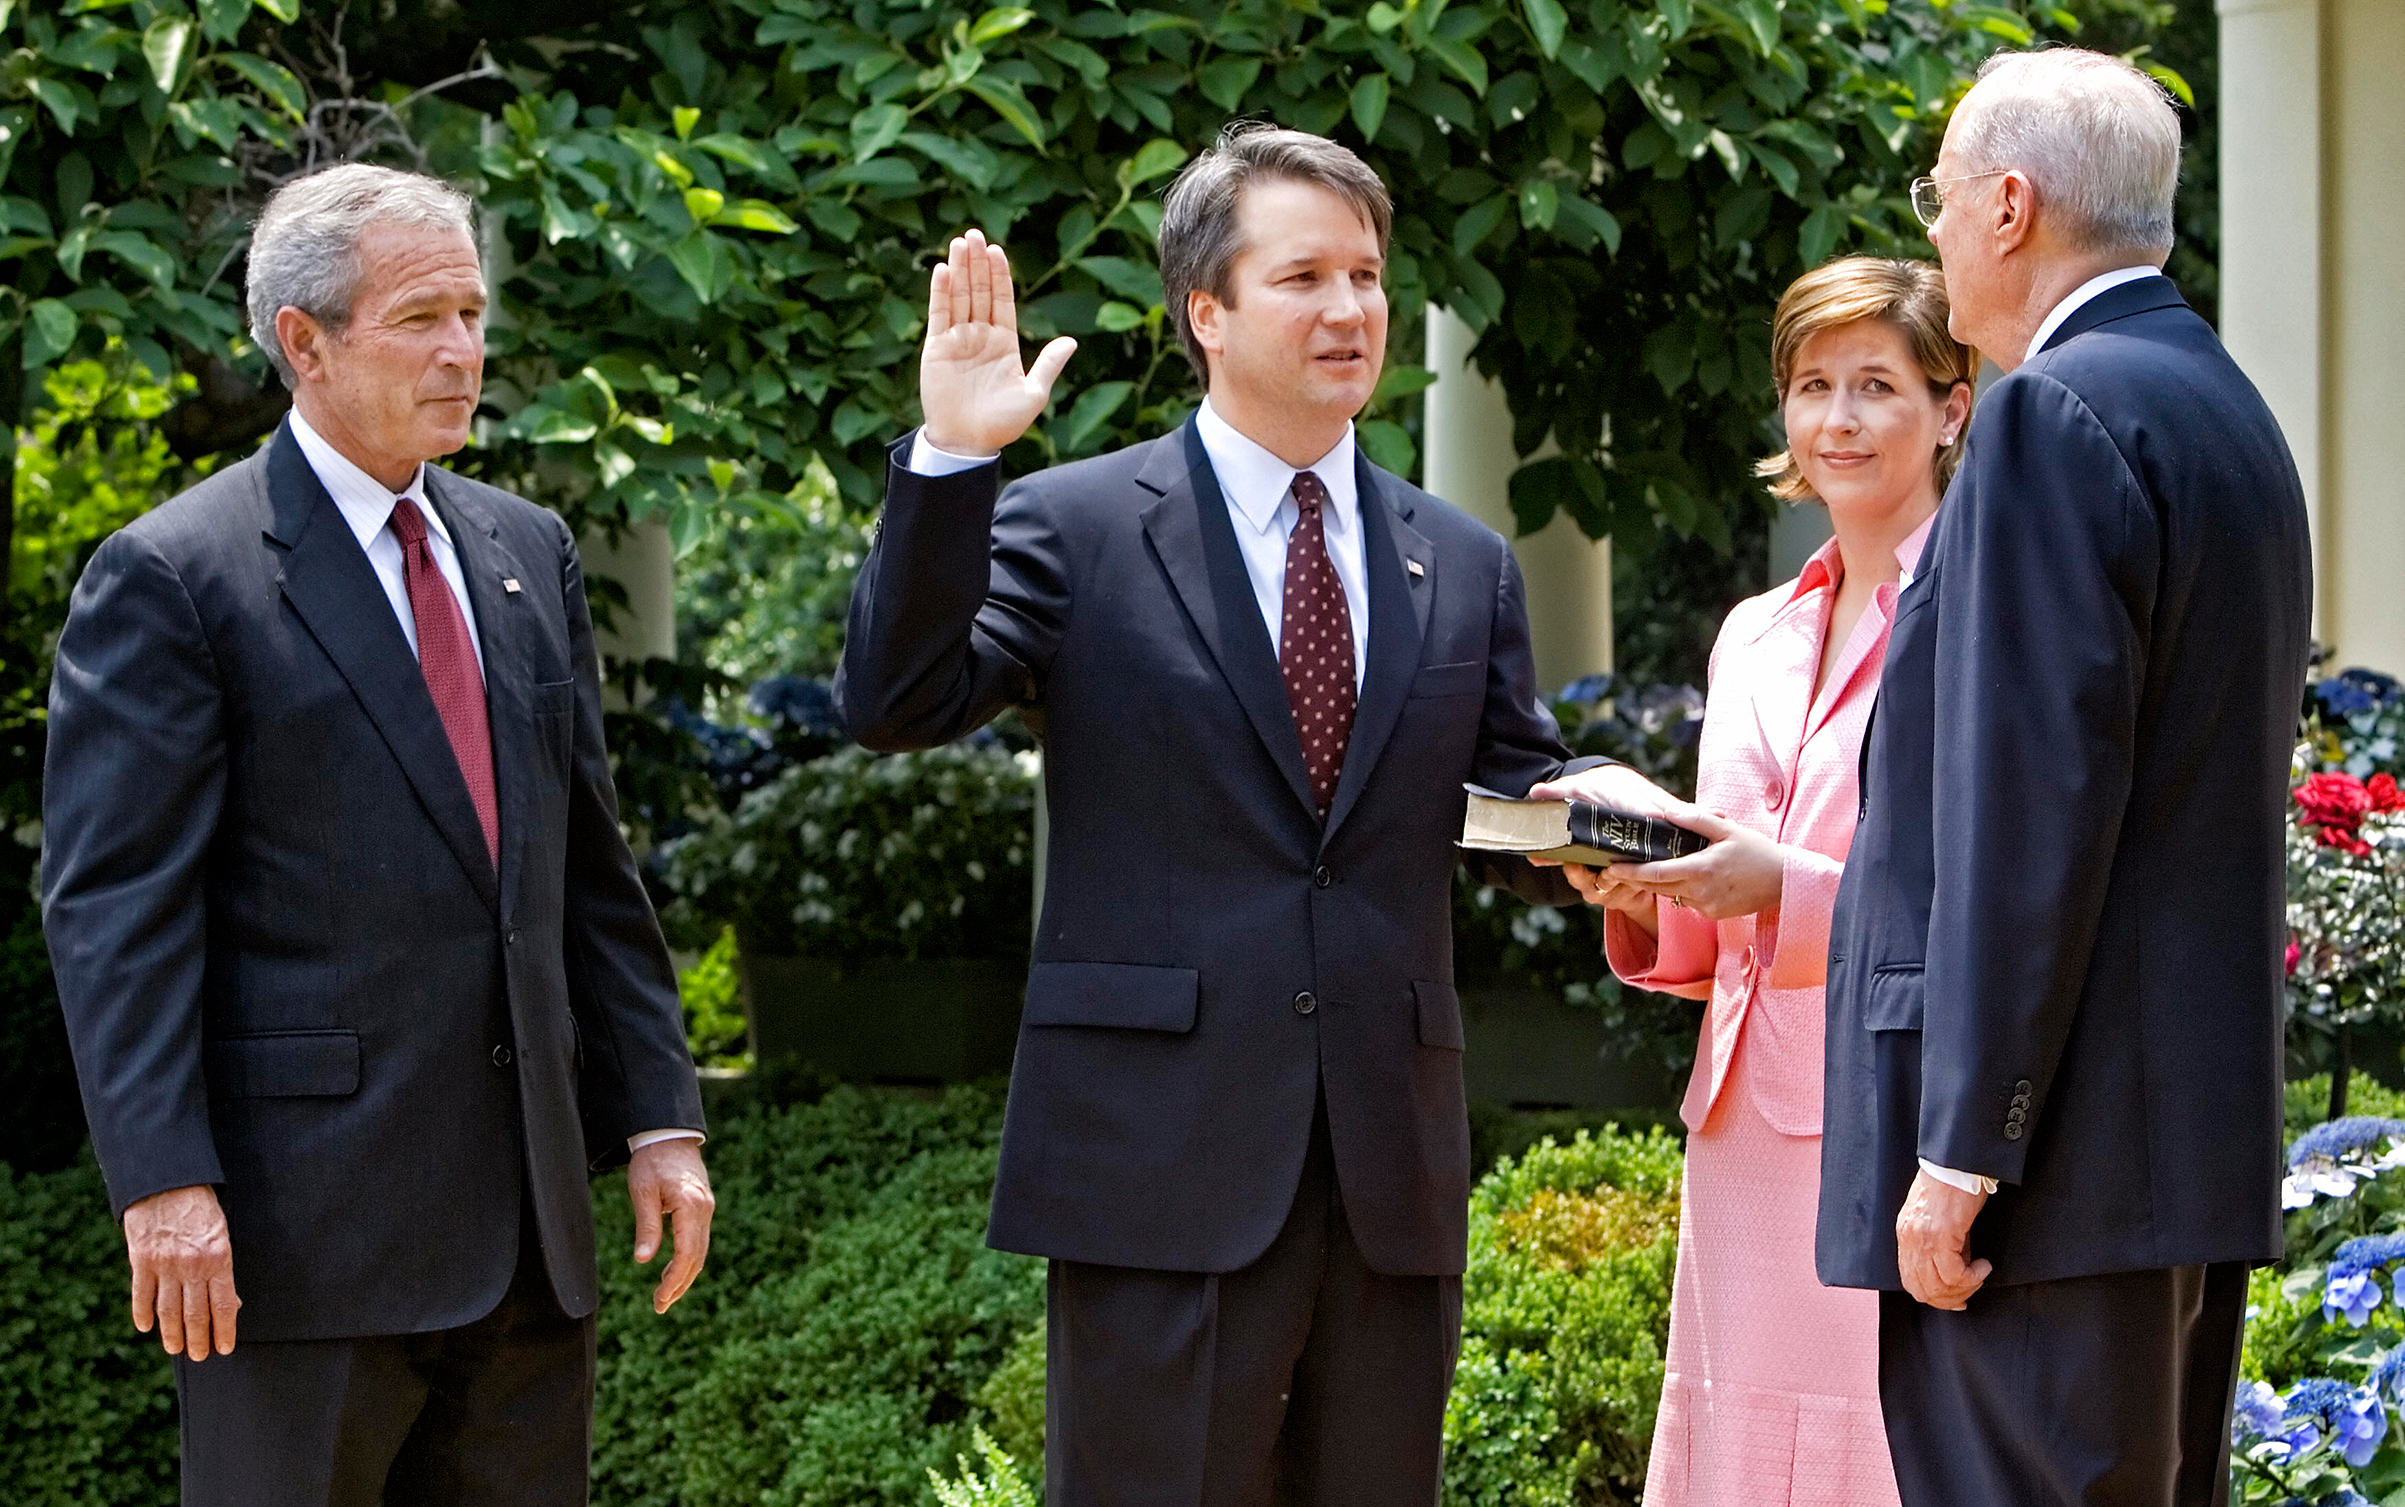 Kavanaugh is sworn in by Justice Kennedy in 2006 after being nominated by President George W. Bush as a judge on the U.S. Court of Appeals for D.C. (Paul J. Richards—AFP/Getty Images)